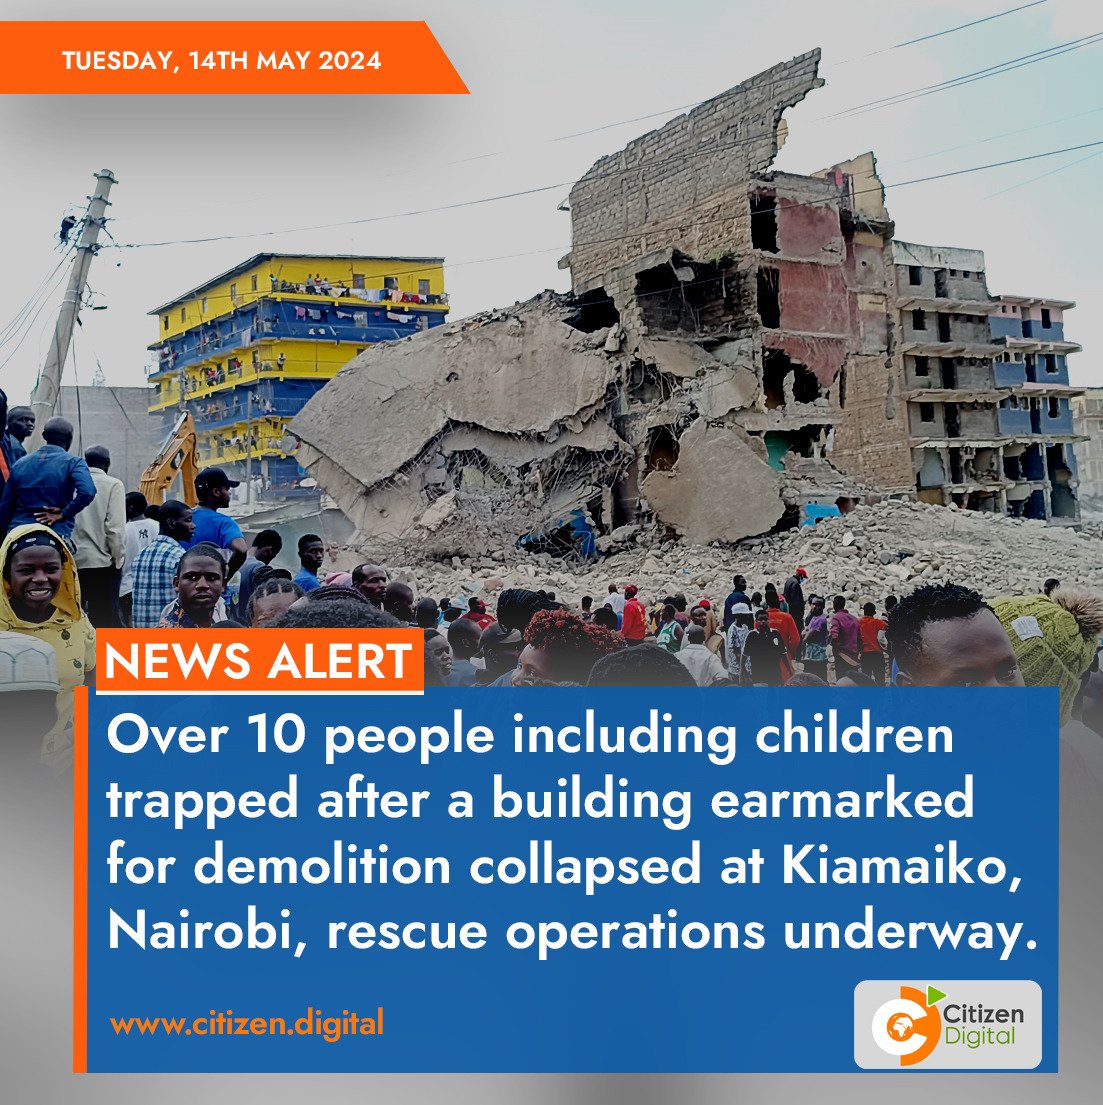 Over 10 people including children trapped after a building earmarked for demolition collapsed at Kiamaiko, Nairobi, rescue operations underway